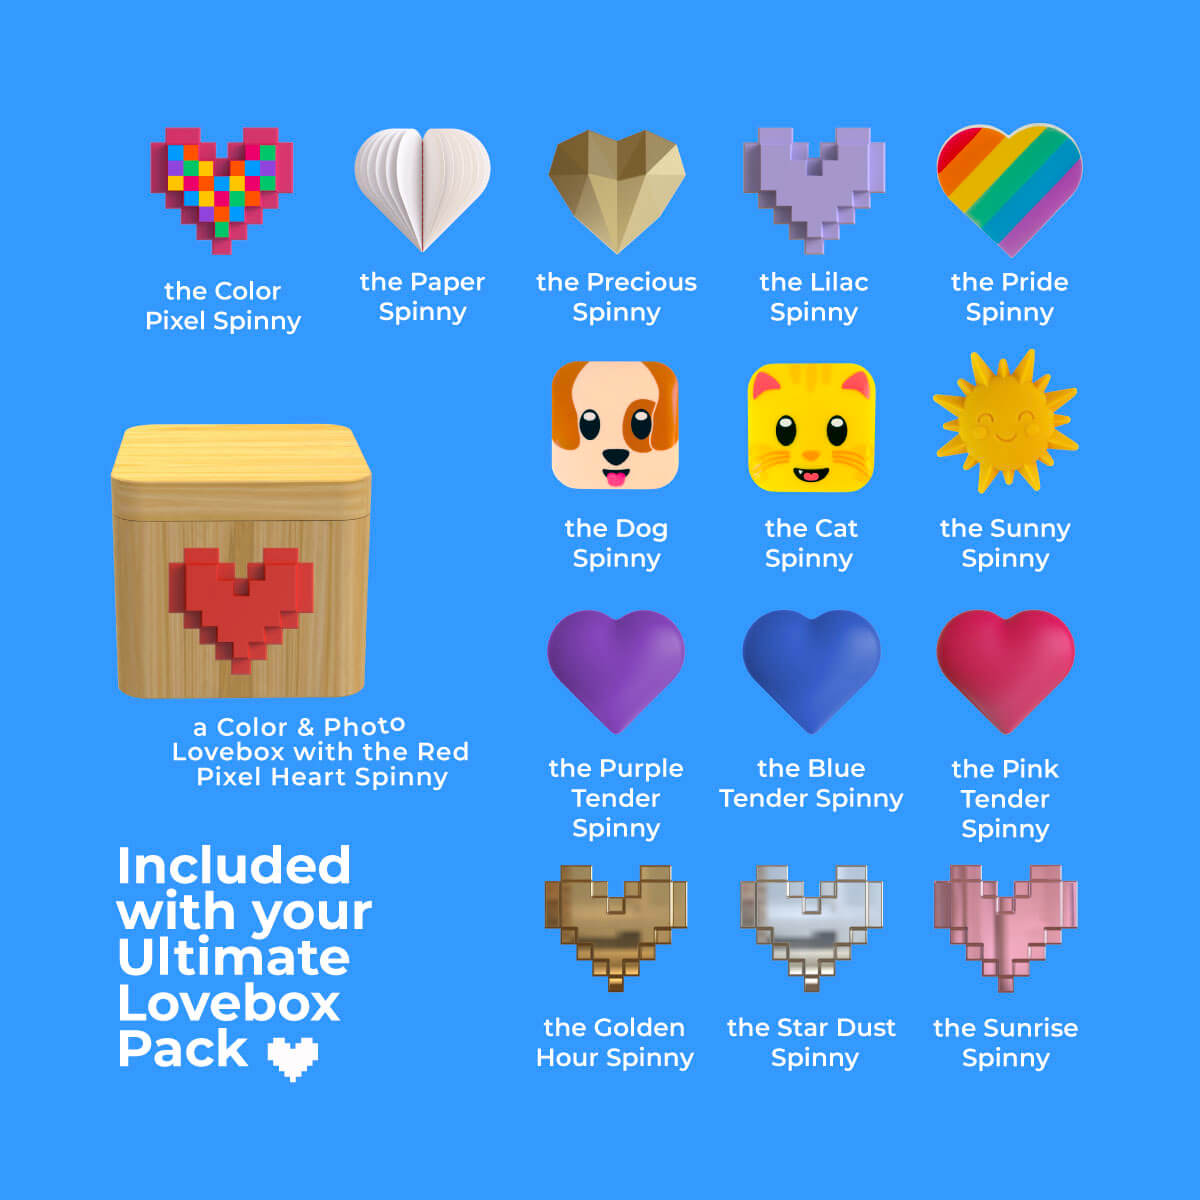 The Ultimate Lovebox Pack